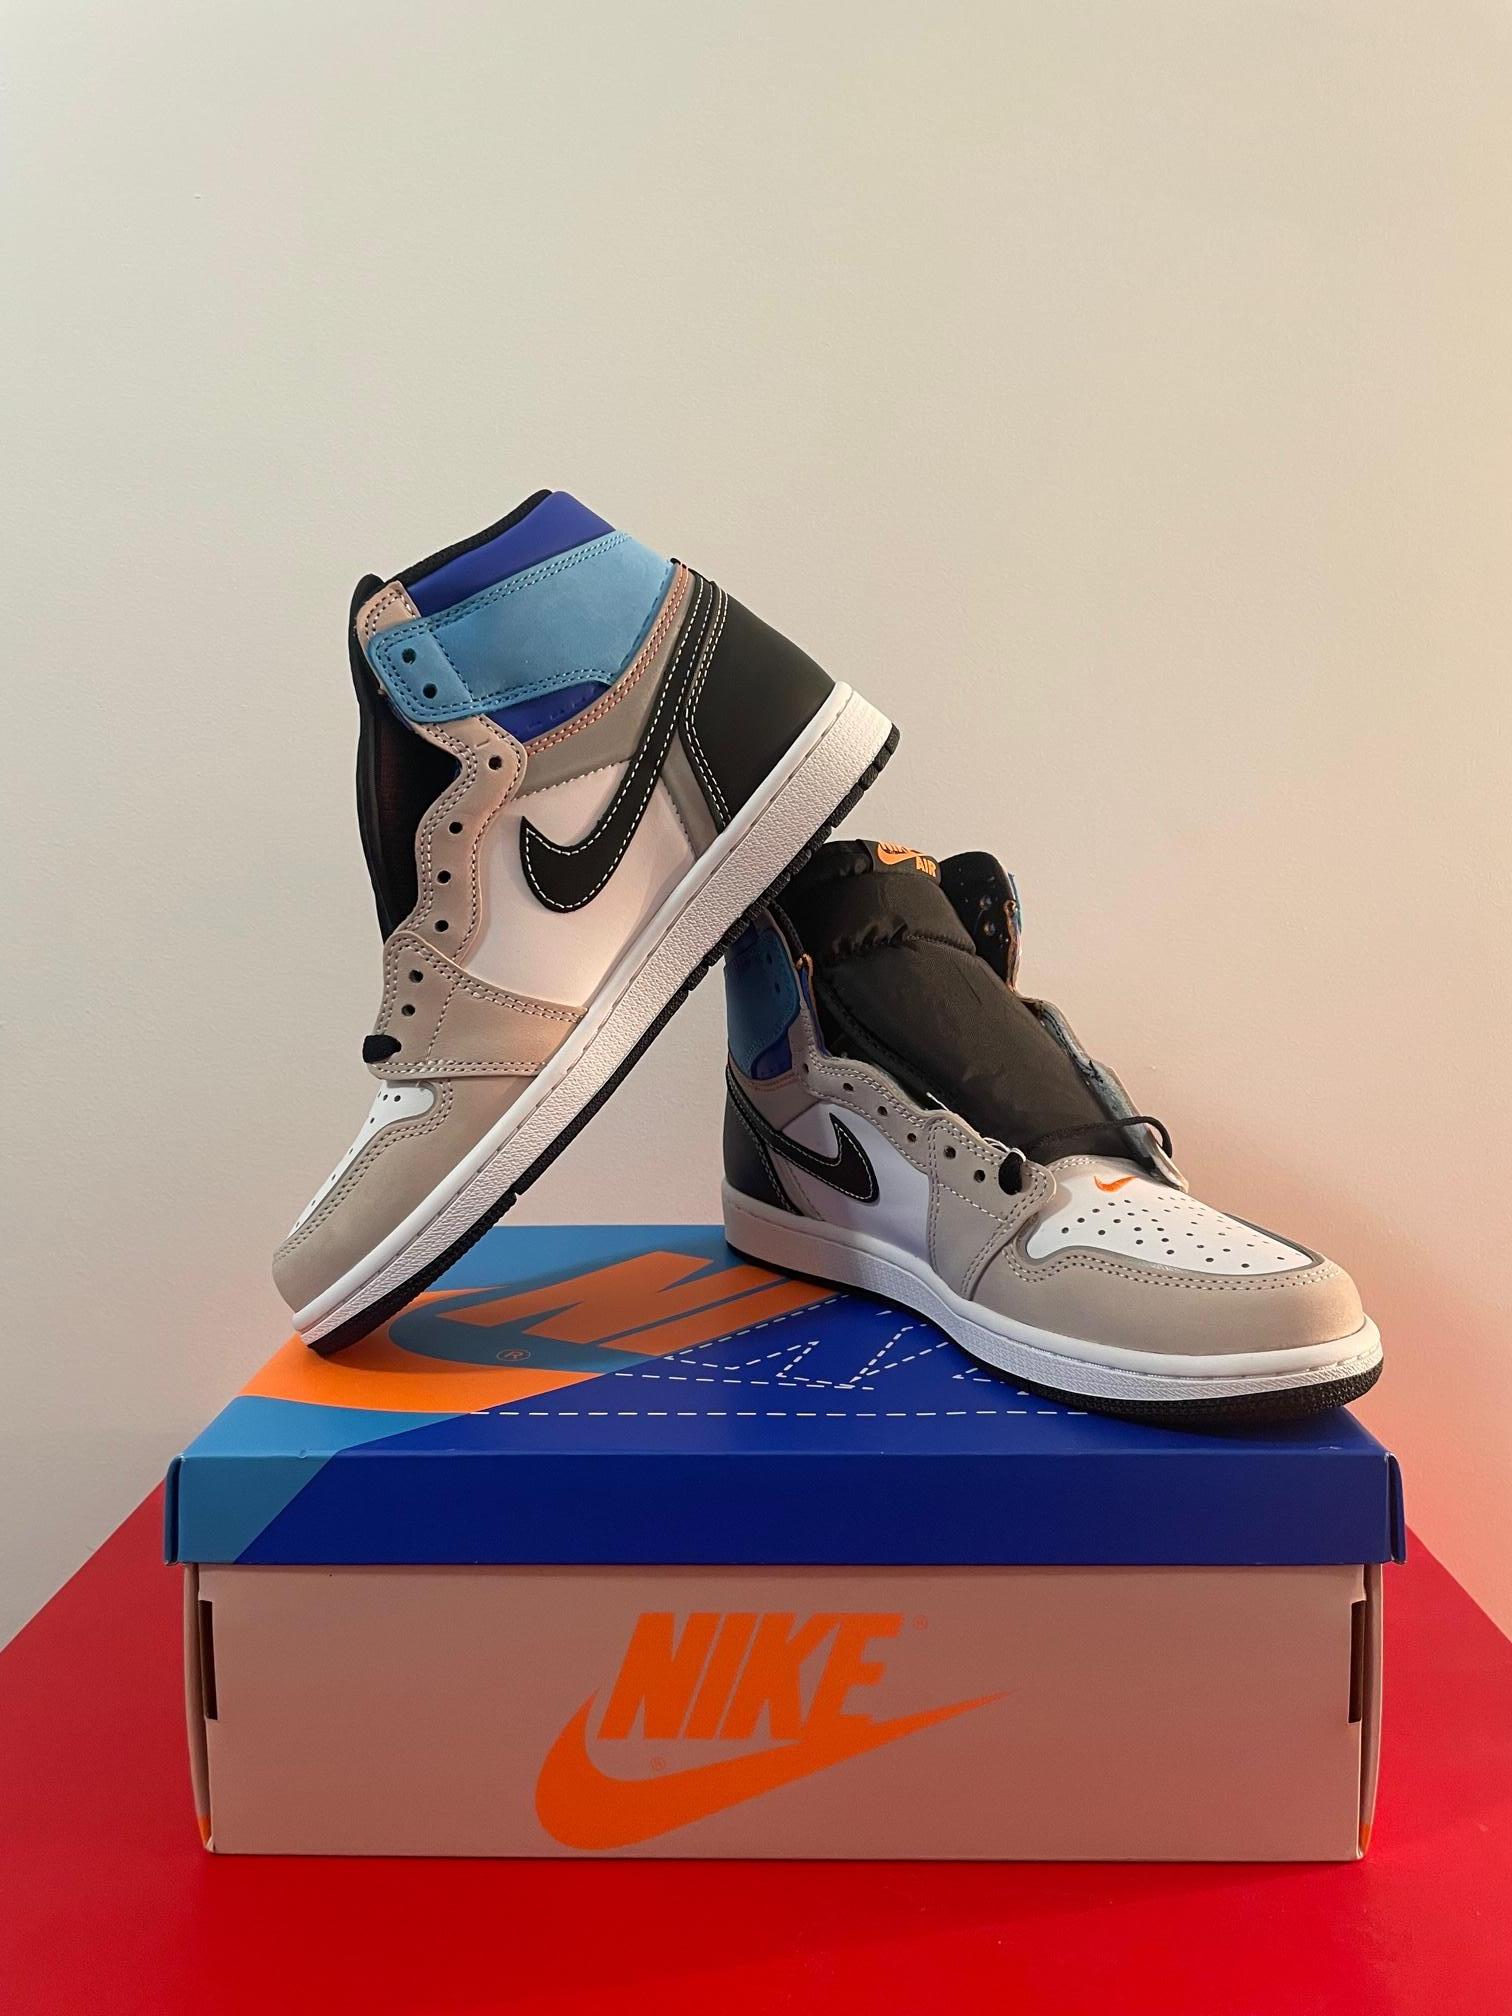 Style and fashion lovers these days are no longer limited to just finding the latest trend. Nike Jordan 1 Retro High OG were created for all fans of quality shoes who want to feel fashionable and comfortable at the same time. These beautiful